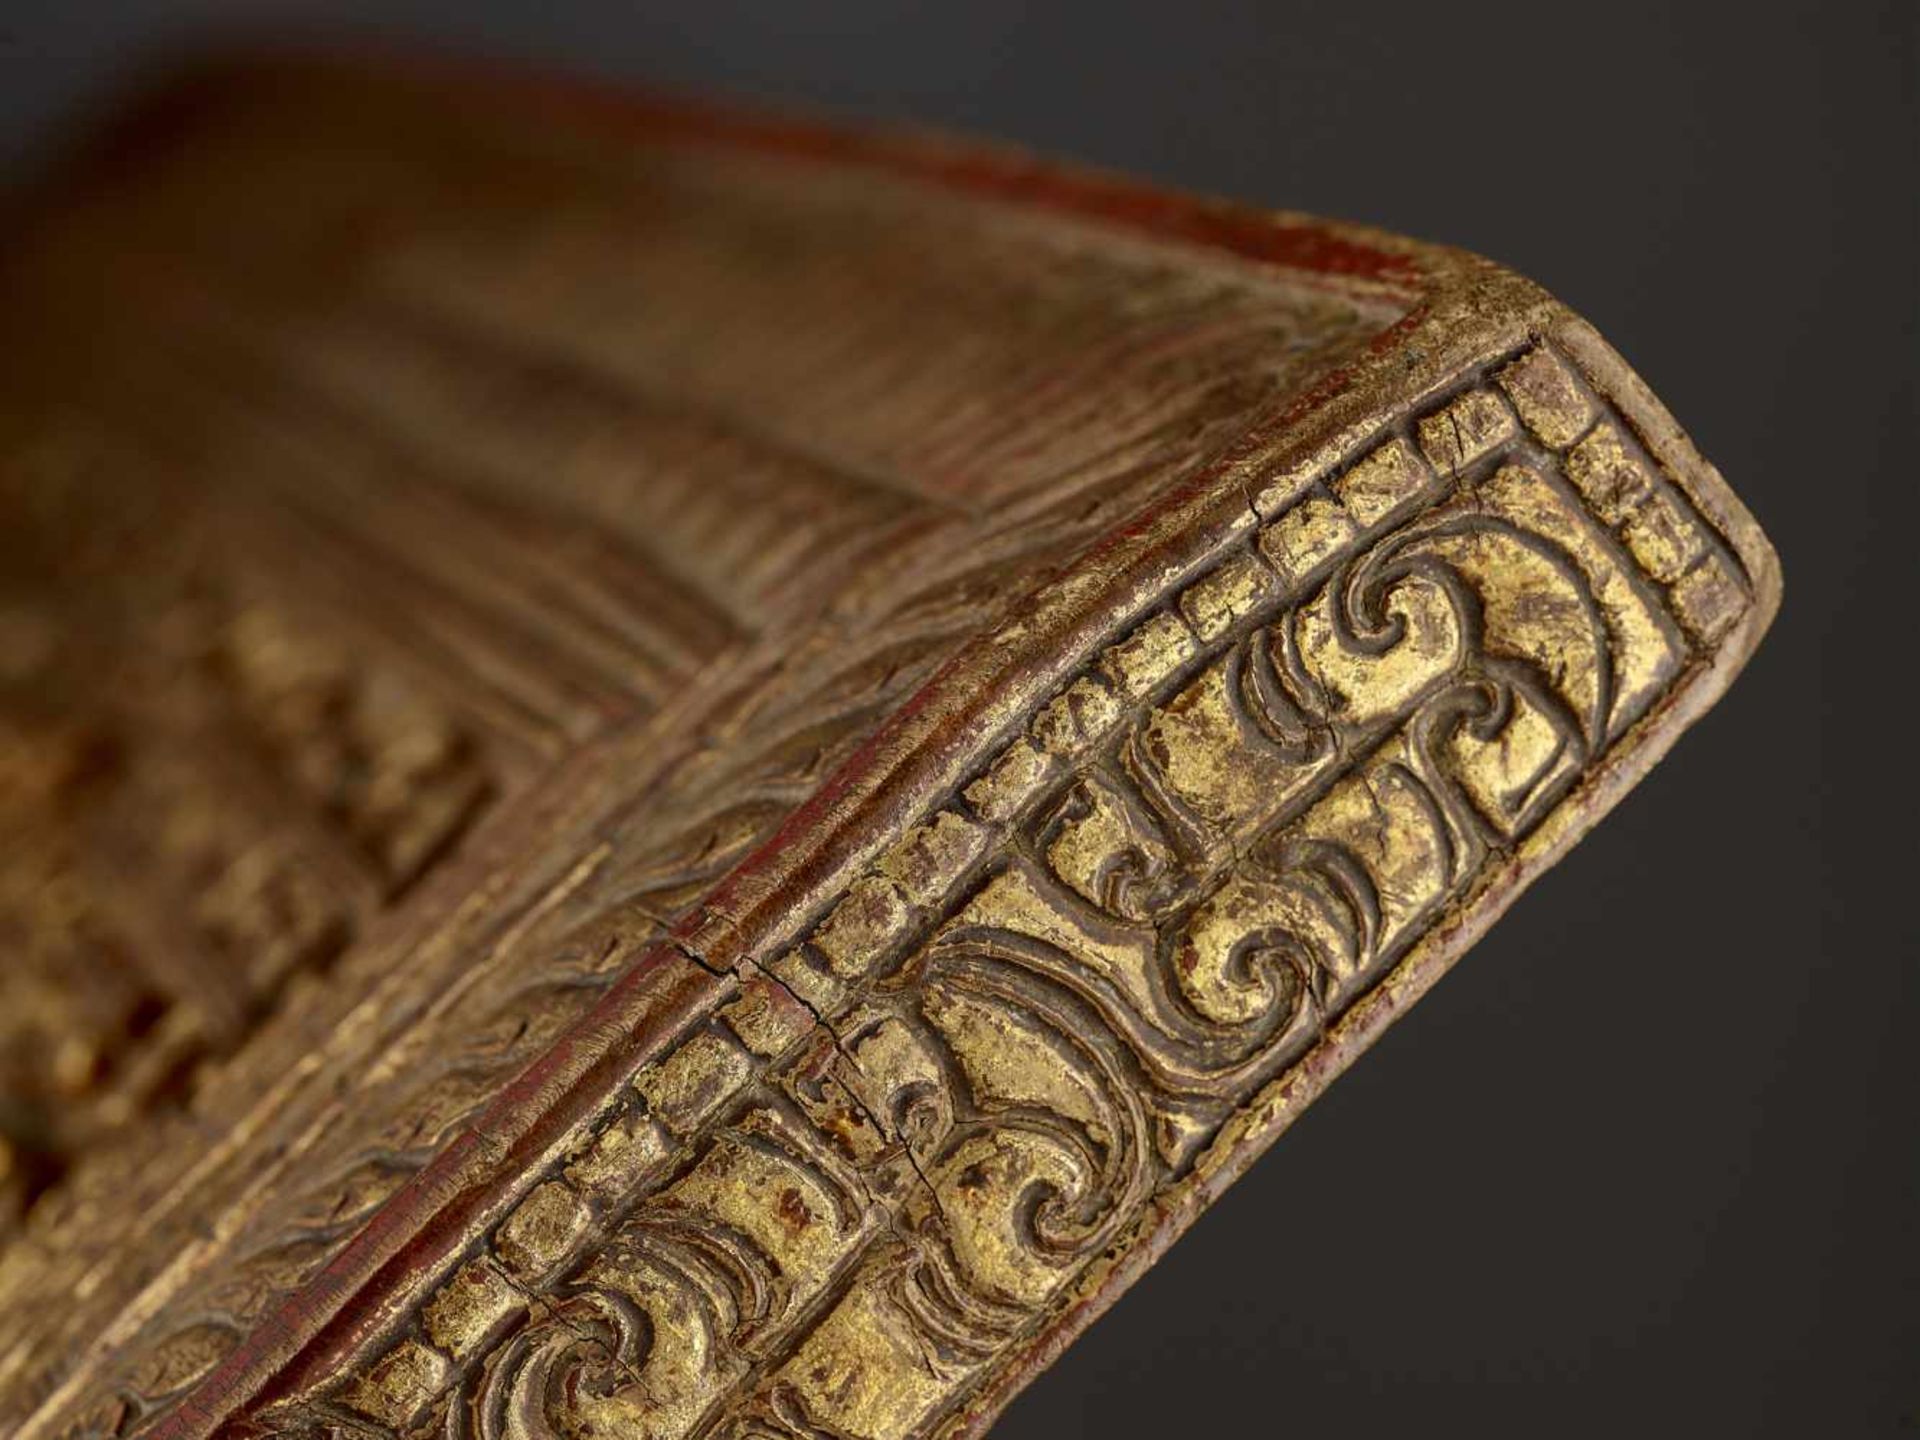 A RARE MANUSCRIPT COVER 17TH CENTURY Tibet, 17th - earlier 18th century. The finely carved and - Bild 4 aus 5